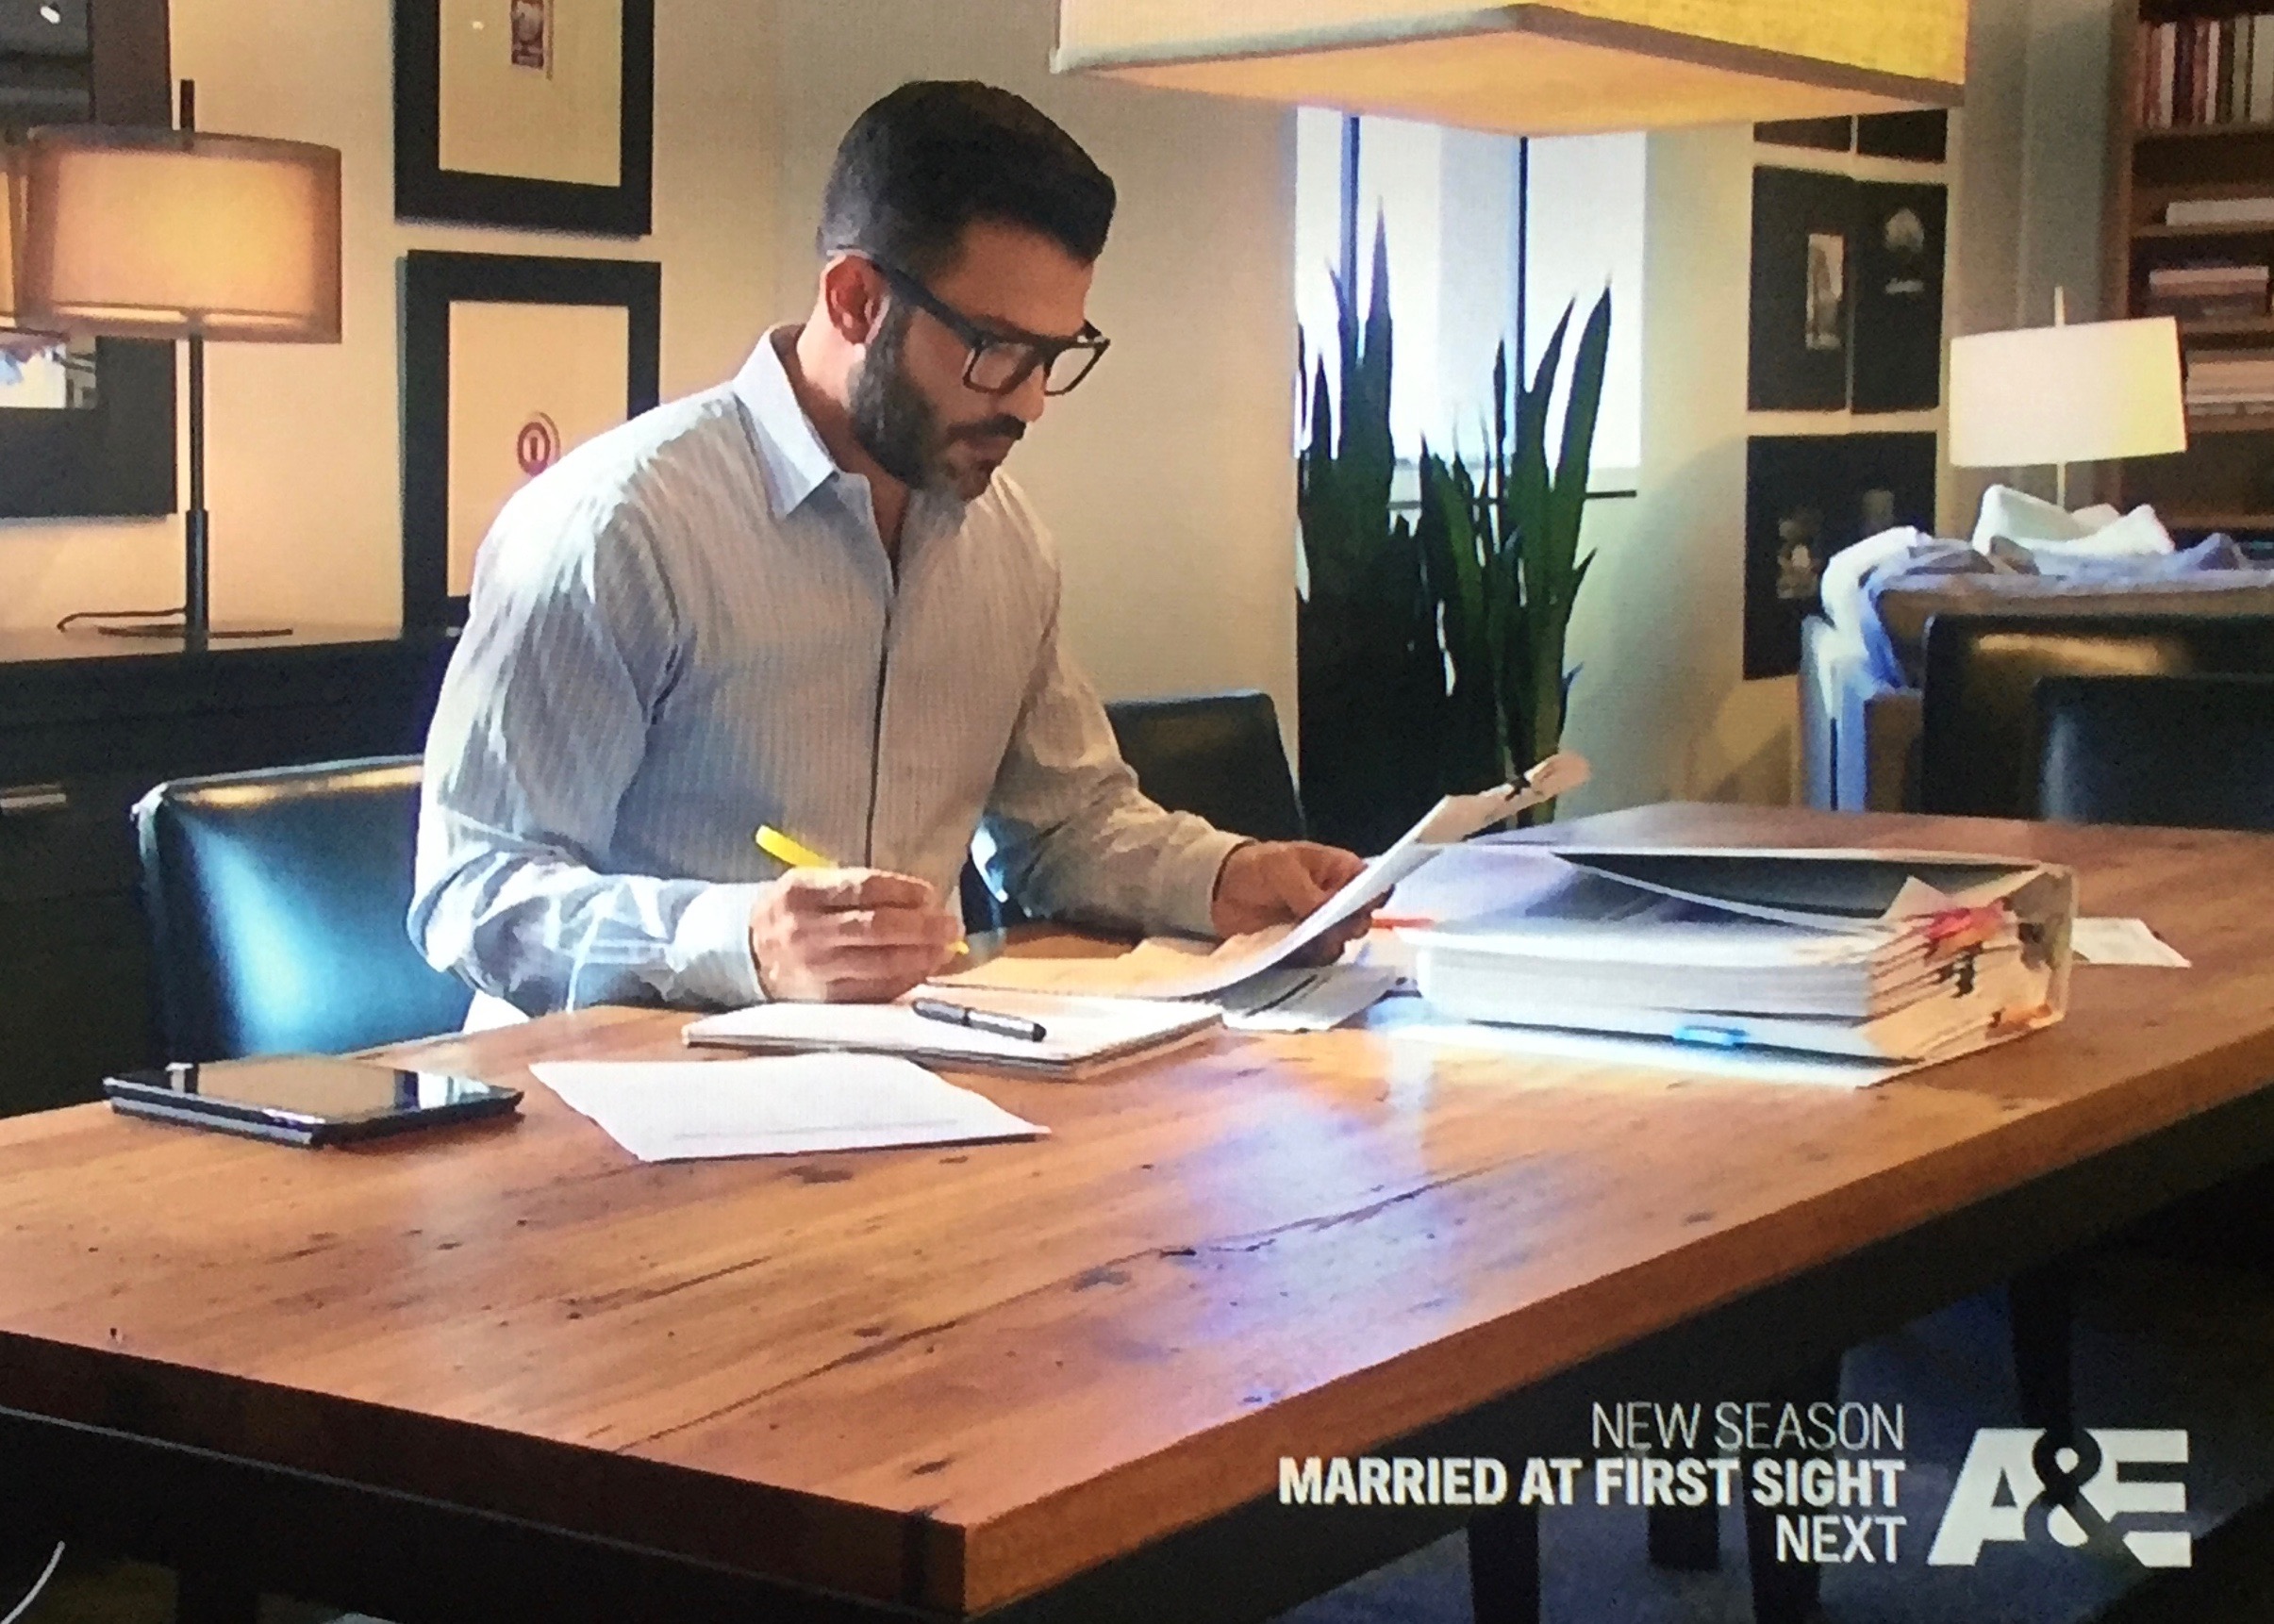 Dr. Joseph Cilona Married At First Sight: Season 3